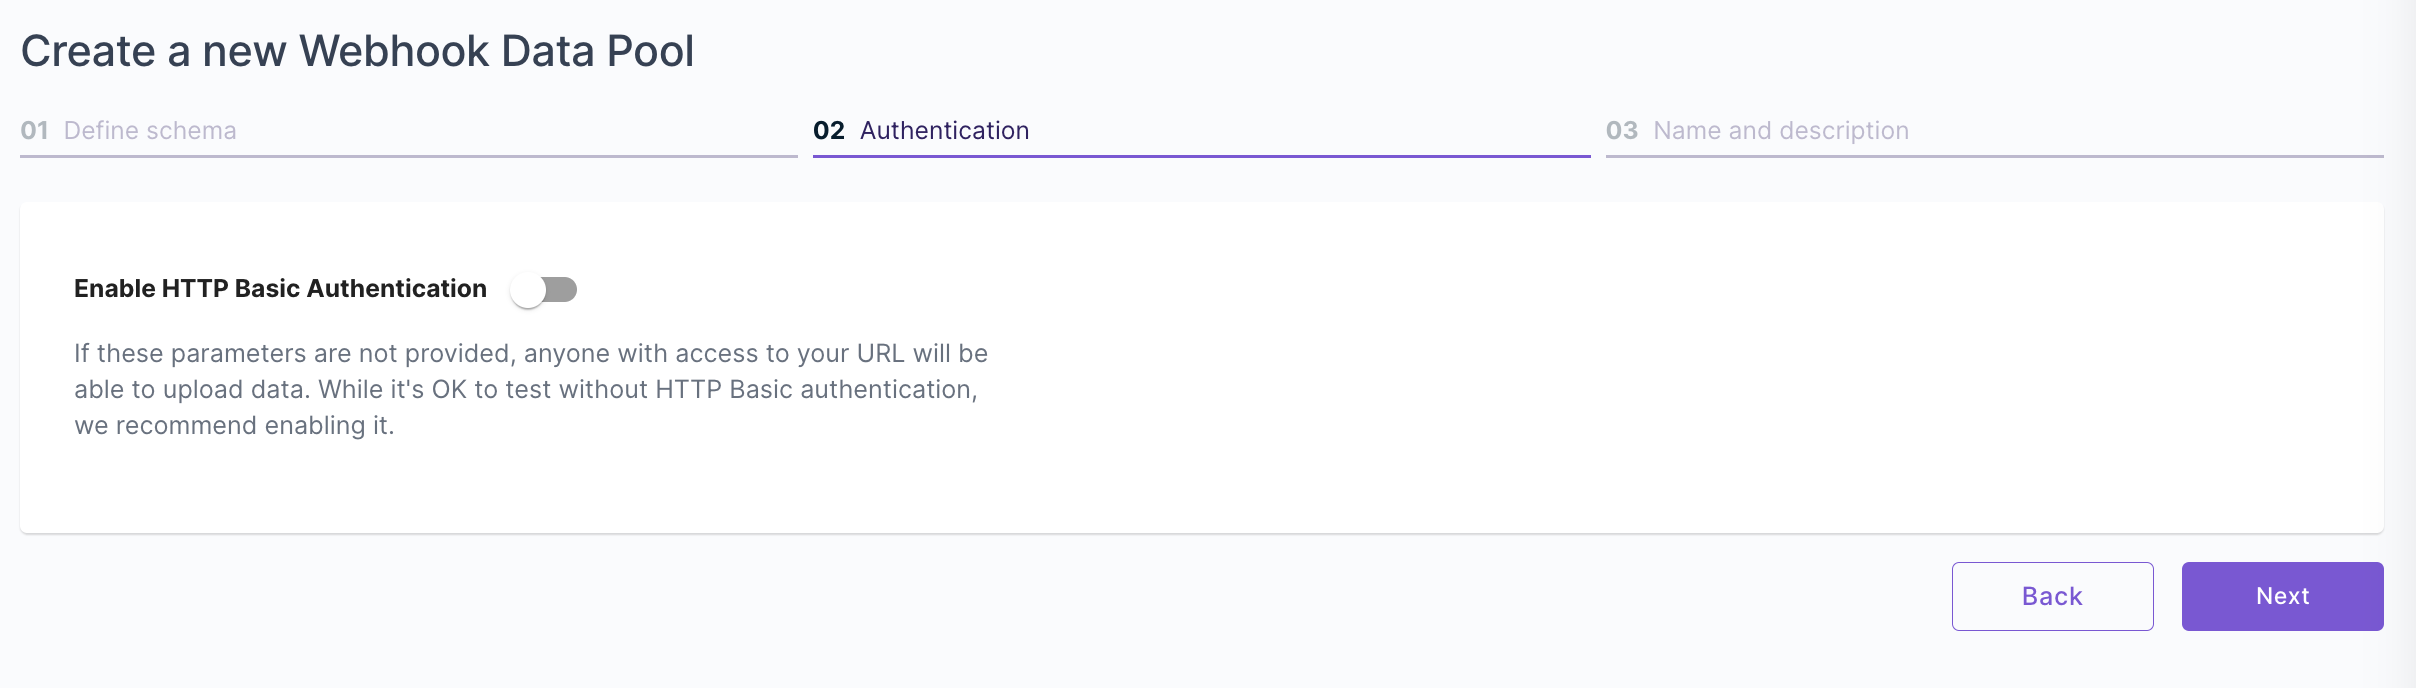 A screenshot demonstrating how to configure authentication for a new Webhook Data Pool in the Propel Console.